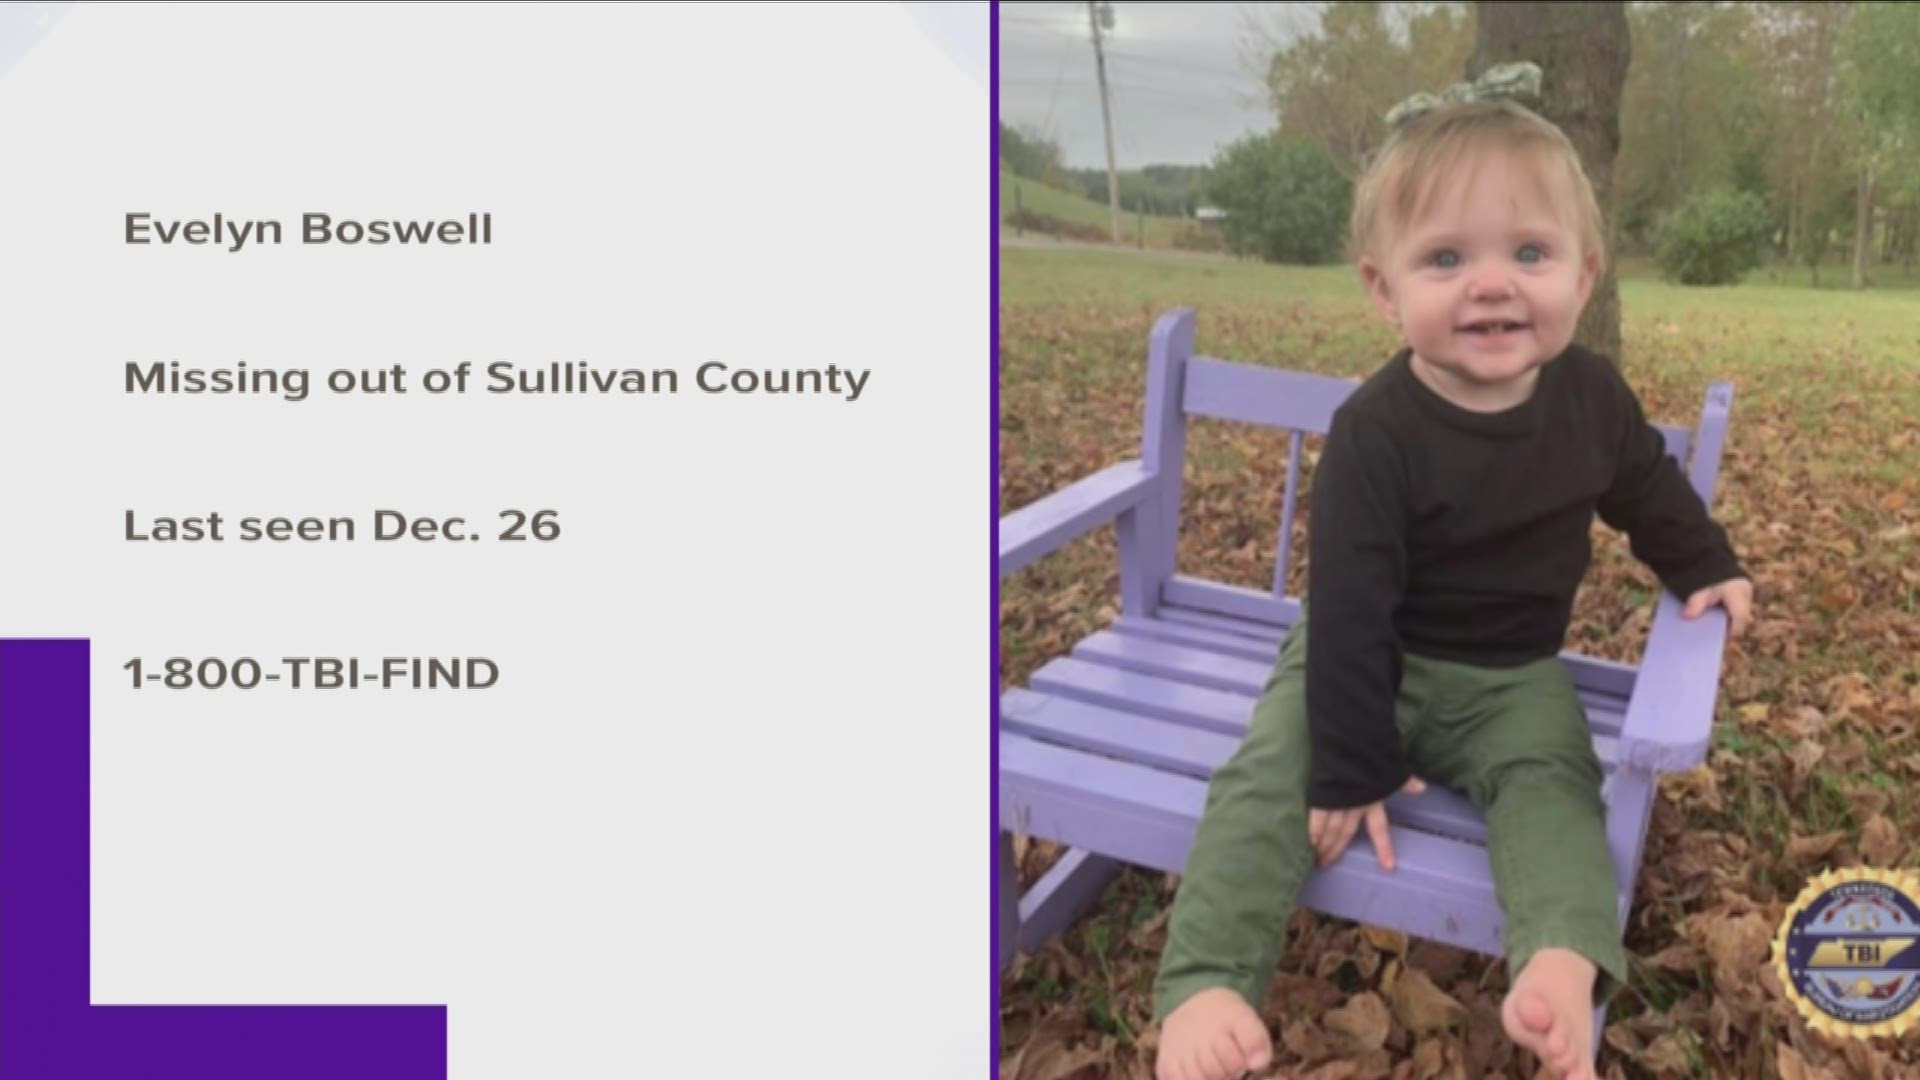 The search continues for Evelyn Boswell, the 15-month-old missing from Sullivan County.